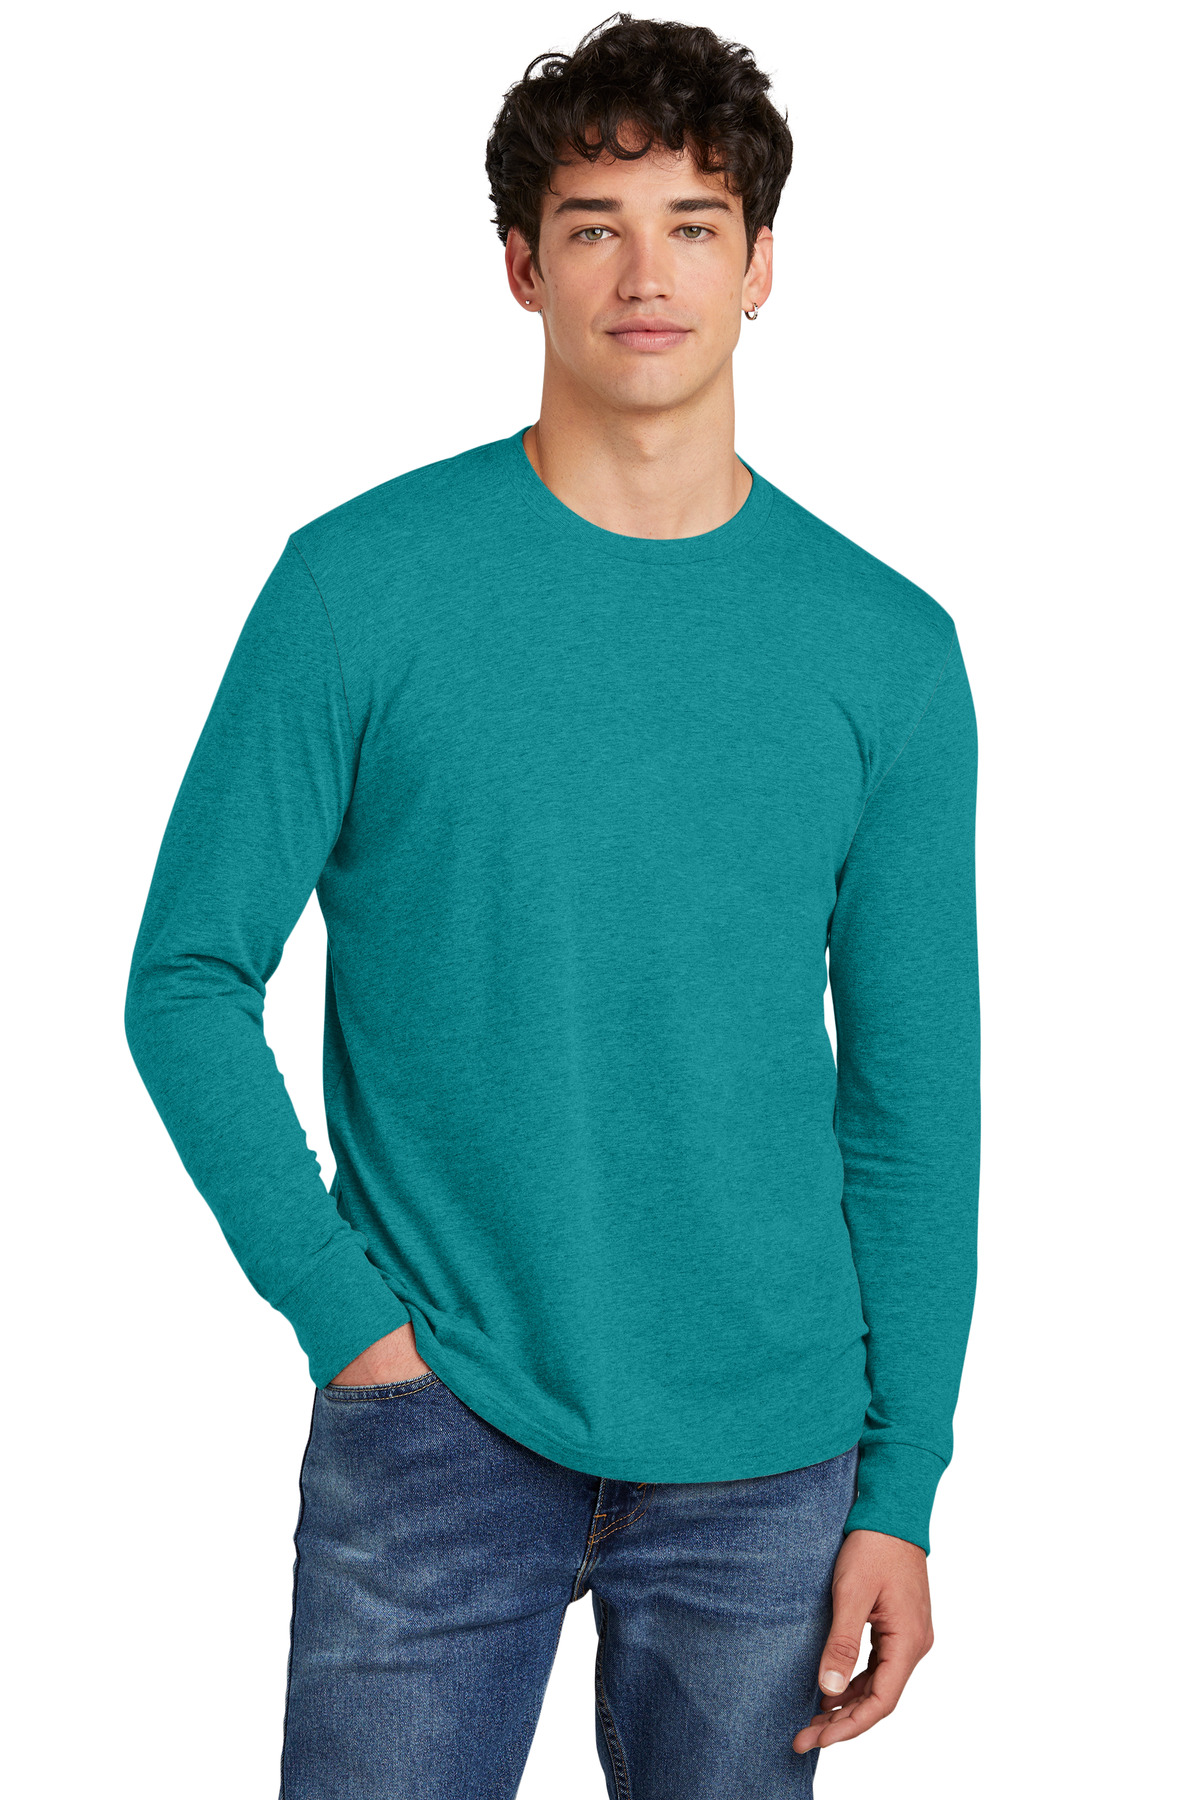 click to view Heathered Teal